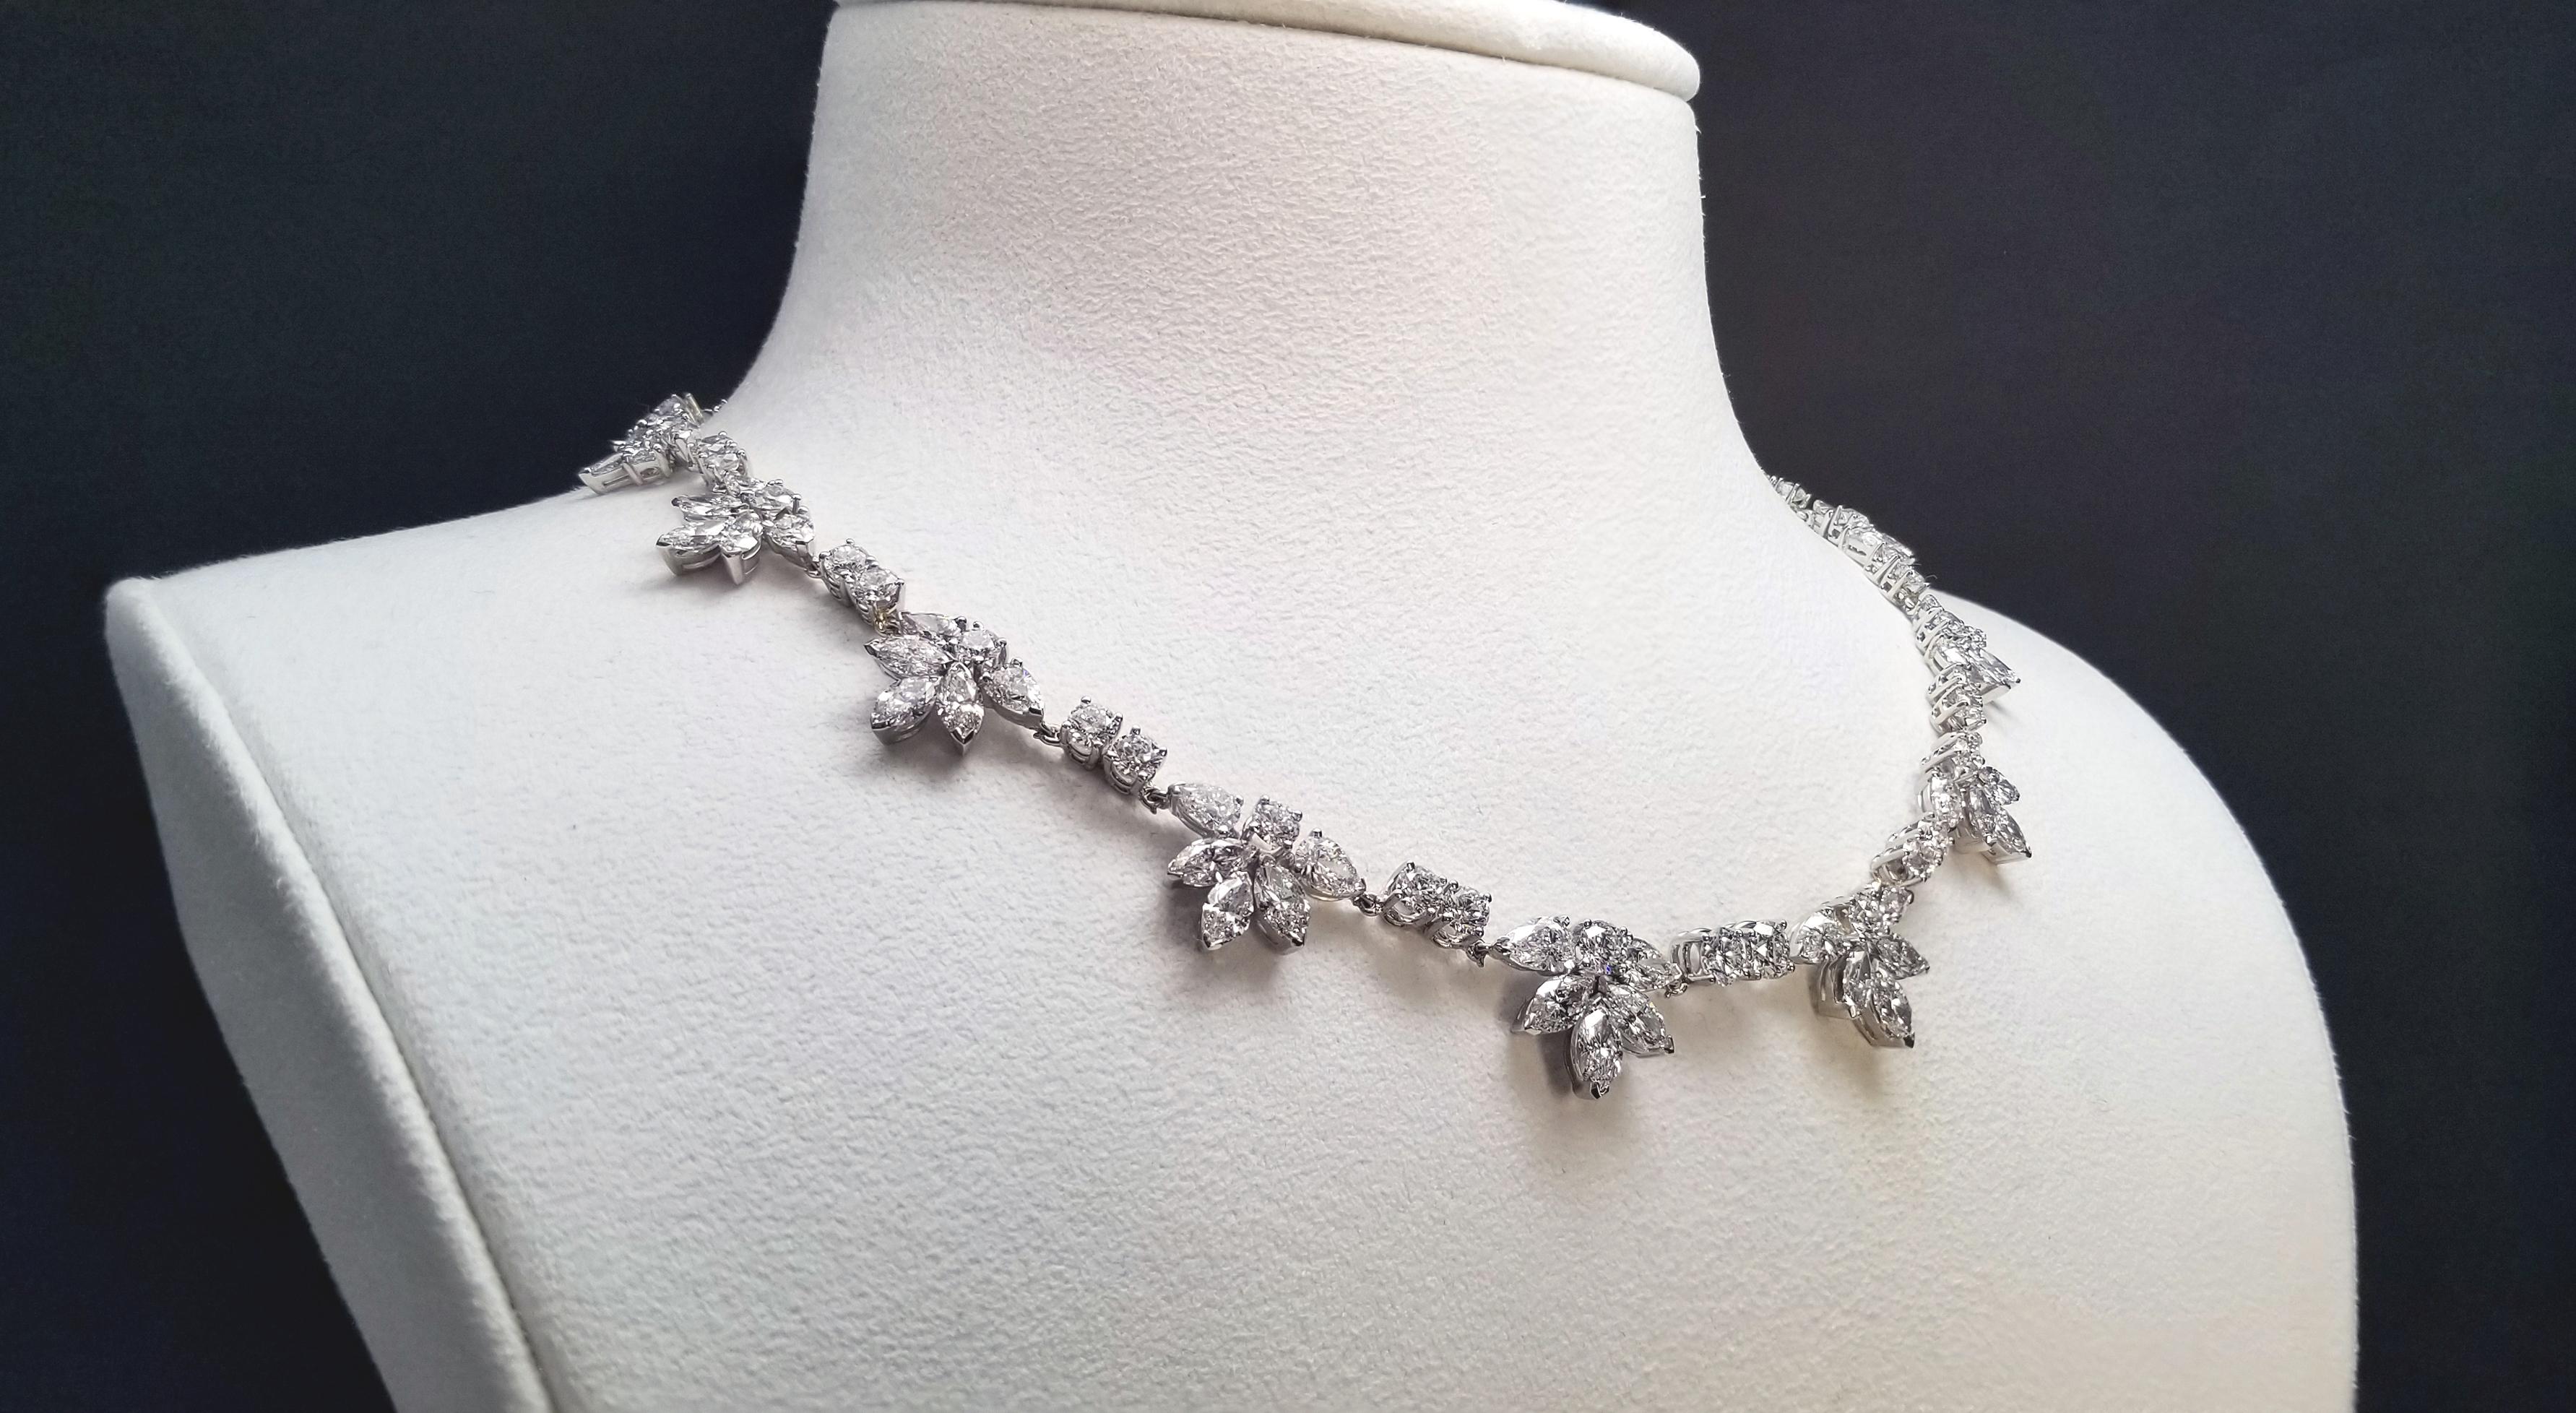 Scarselli is featuring a platinum 12.88 carat mix marquise and round brilliant cut diamonds necklace. The hand-made setting filled with Scarselli quality E diamonds VS clarity.  Lock clasp designed as horizontal plaque covered with six round